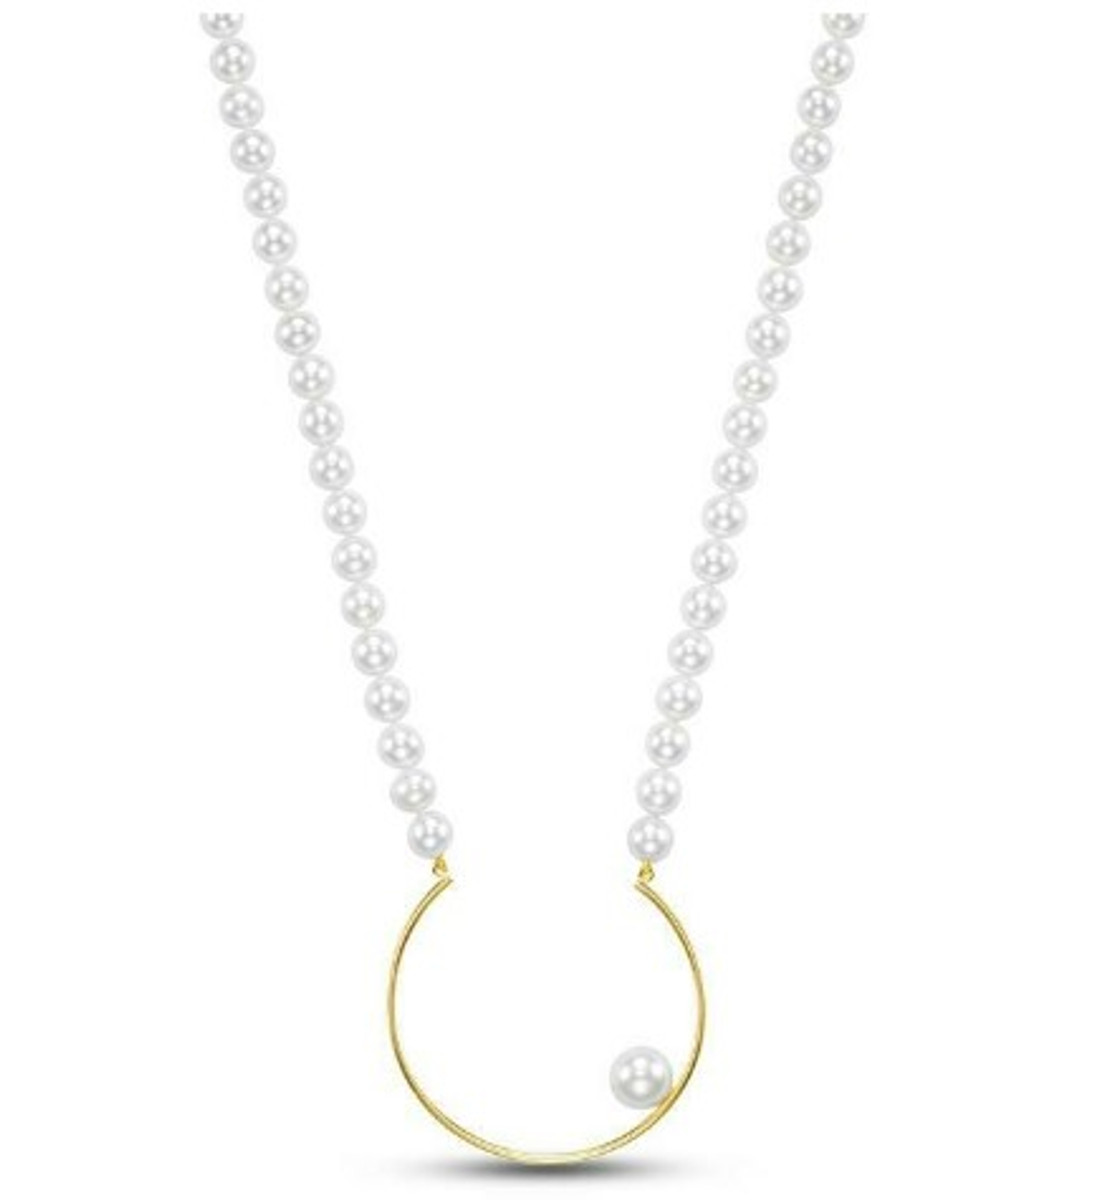 Hyde Park Collection 14K Yellow Gold Pearl Necklace-58548 Product Image